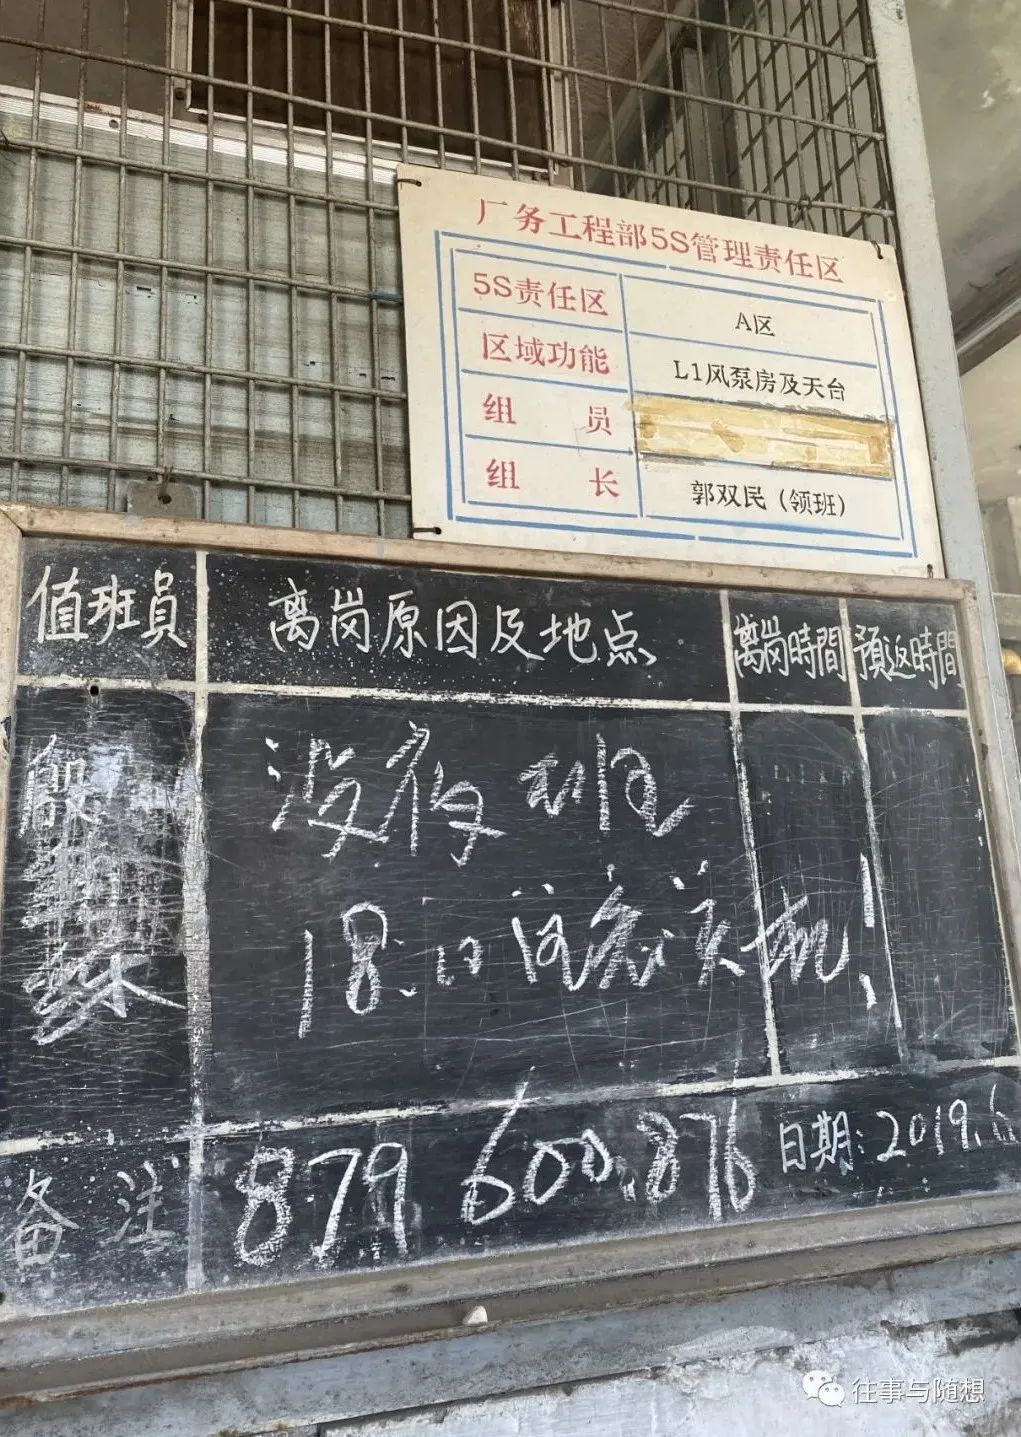 Close-up of some work-related signage and a blackboard with notes about workers' shifts